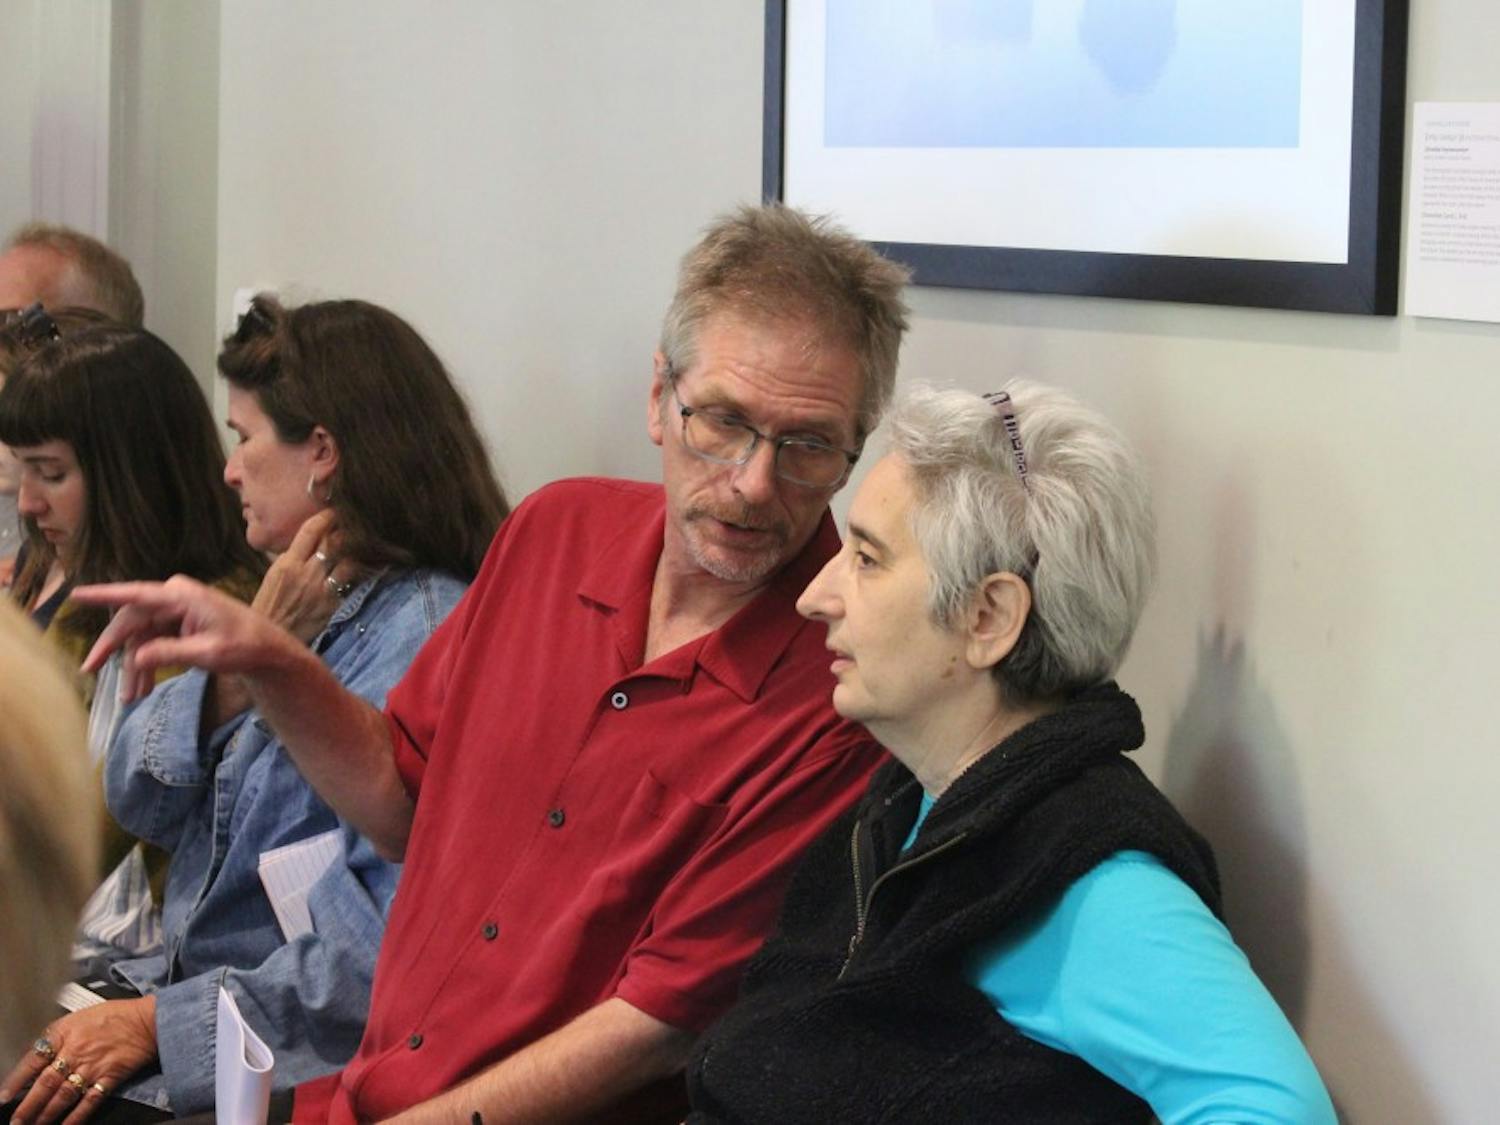 Jay Smith, a history professor at UNC, talks to Sherryl Kleinman, a sociology professor, during the faculty executive committee meeting on April 22, 2019. Smith wrote a memo regarding campus police conduct and student safety that was discussed at the meeting. 